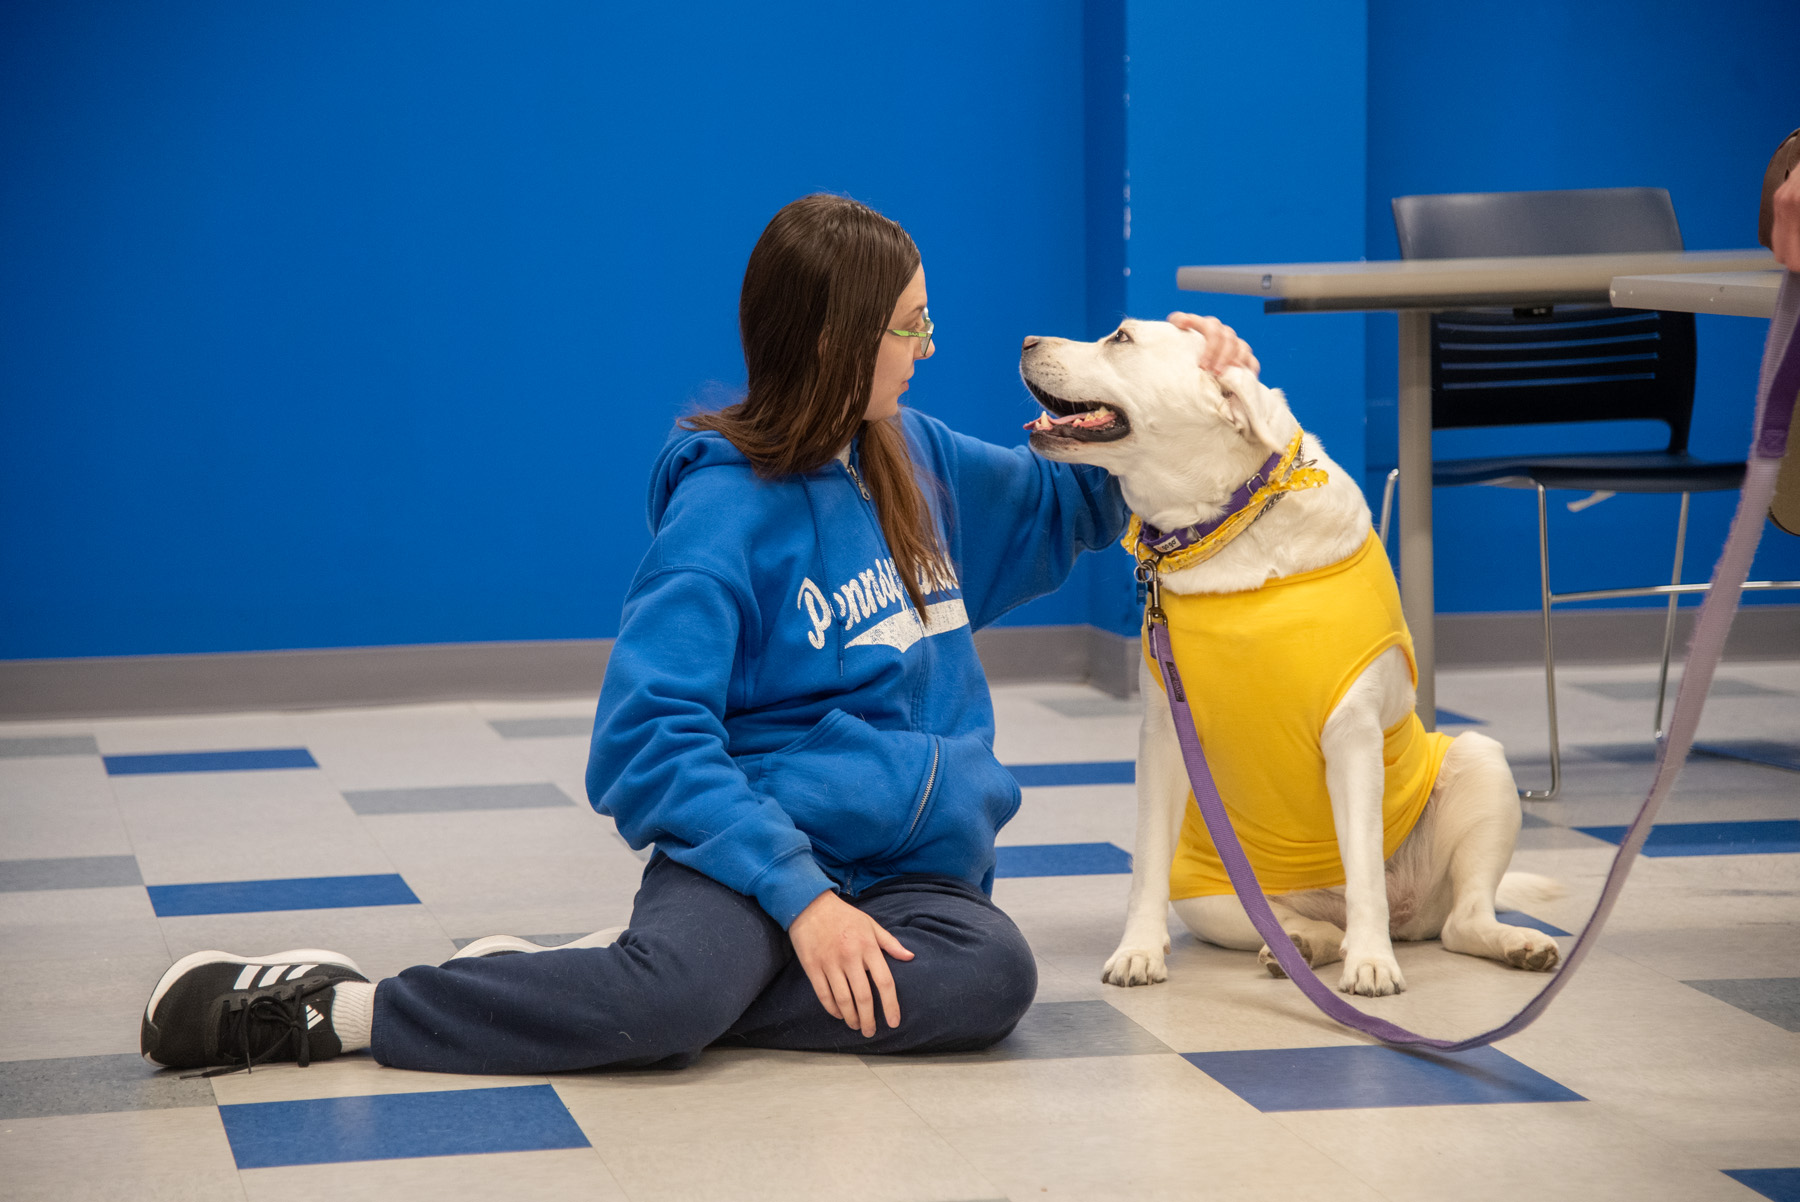 Therapy dogs offer fun and relaxing distraction for students